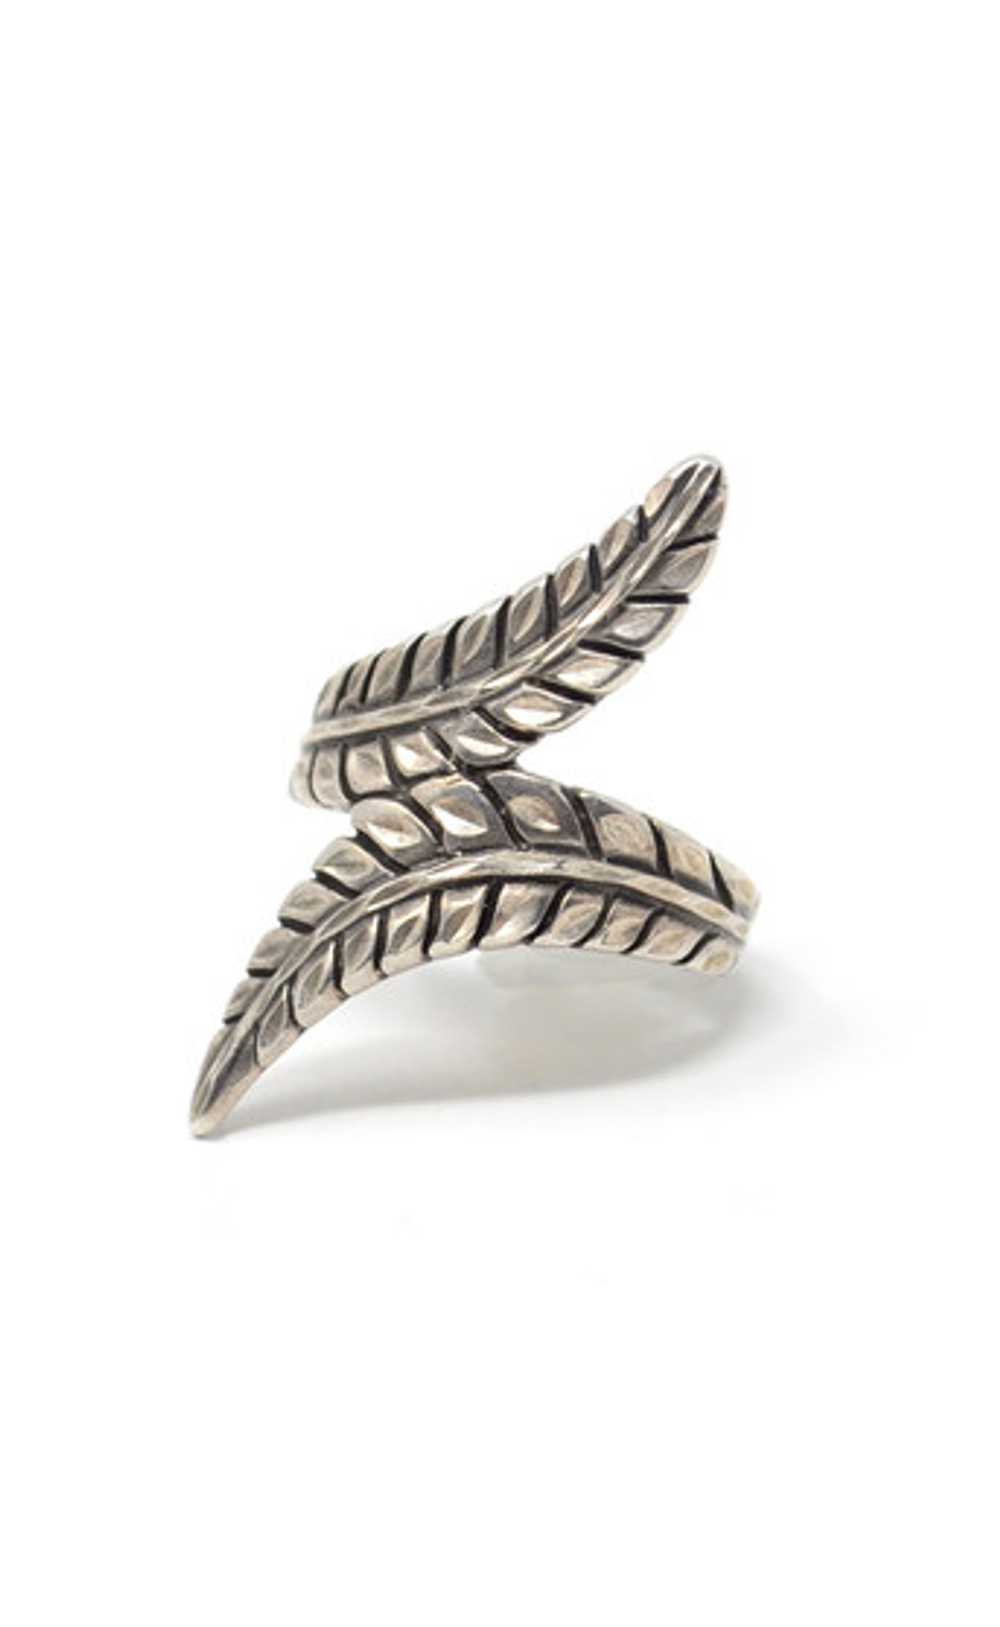 Double Feather 925 Sterling Ring - image 1